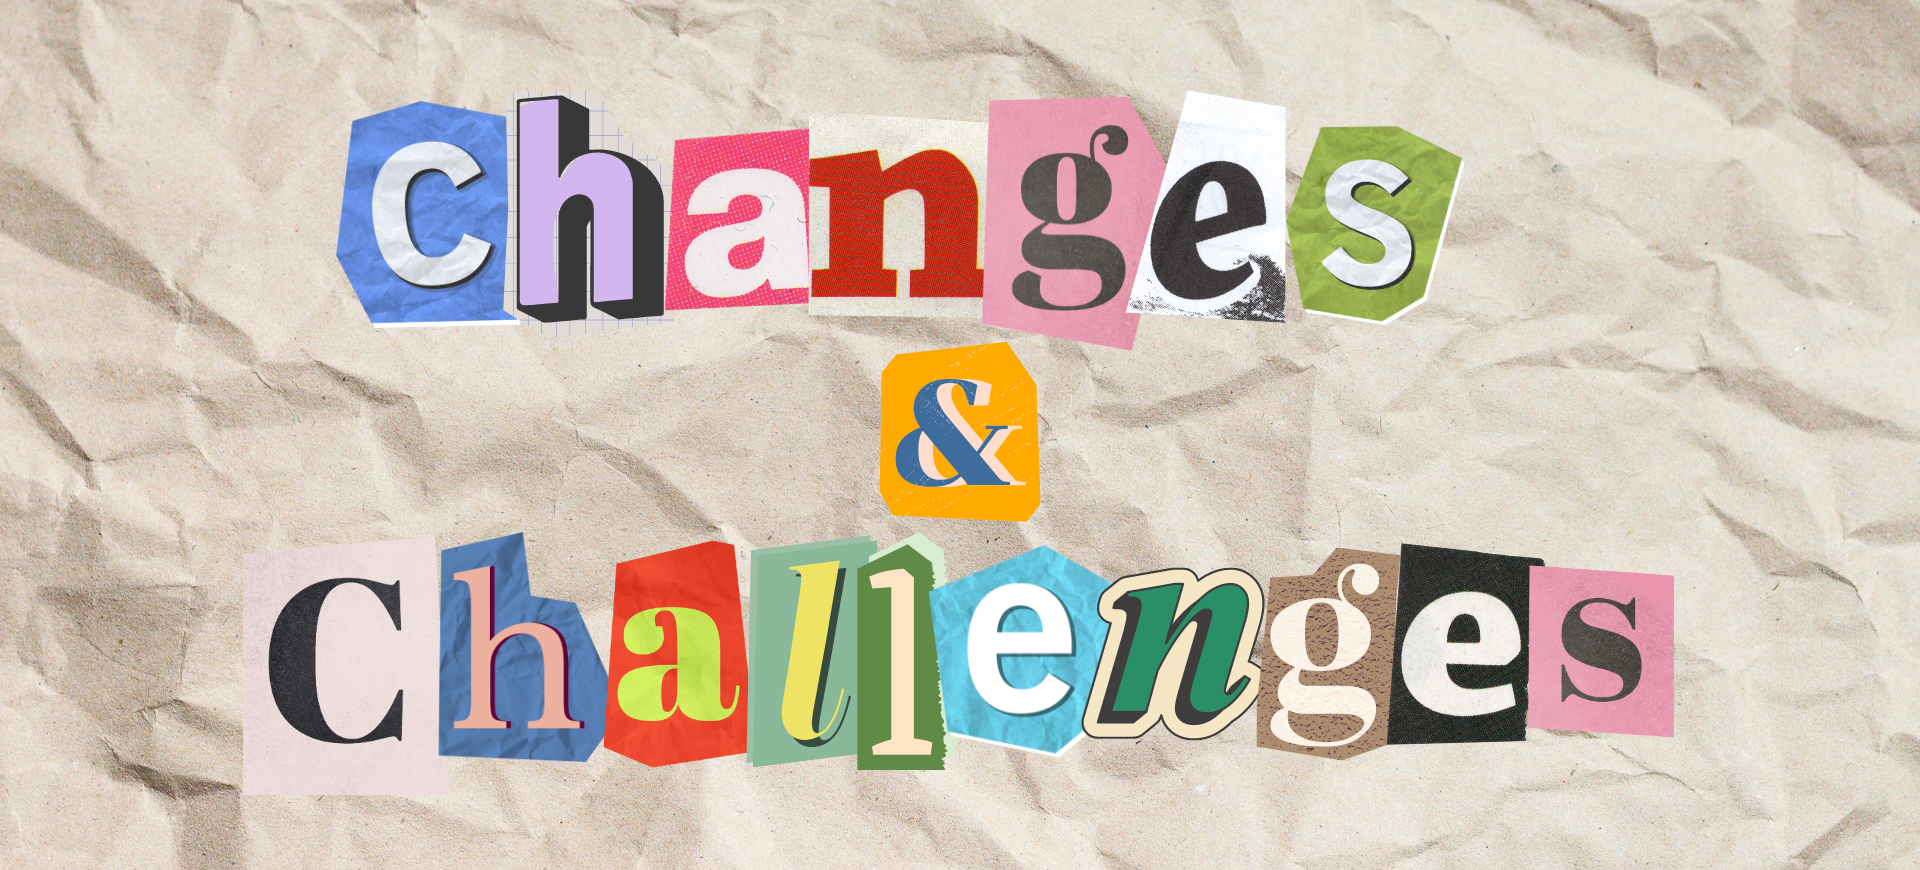 The image shows a collage of cutout letters forming the words &quot;changes &amp;amp; challenges&quot; on a crumpled paper background